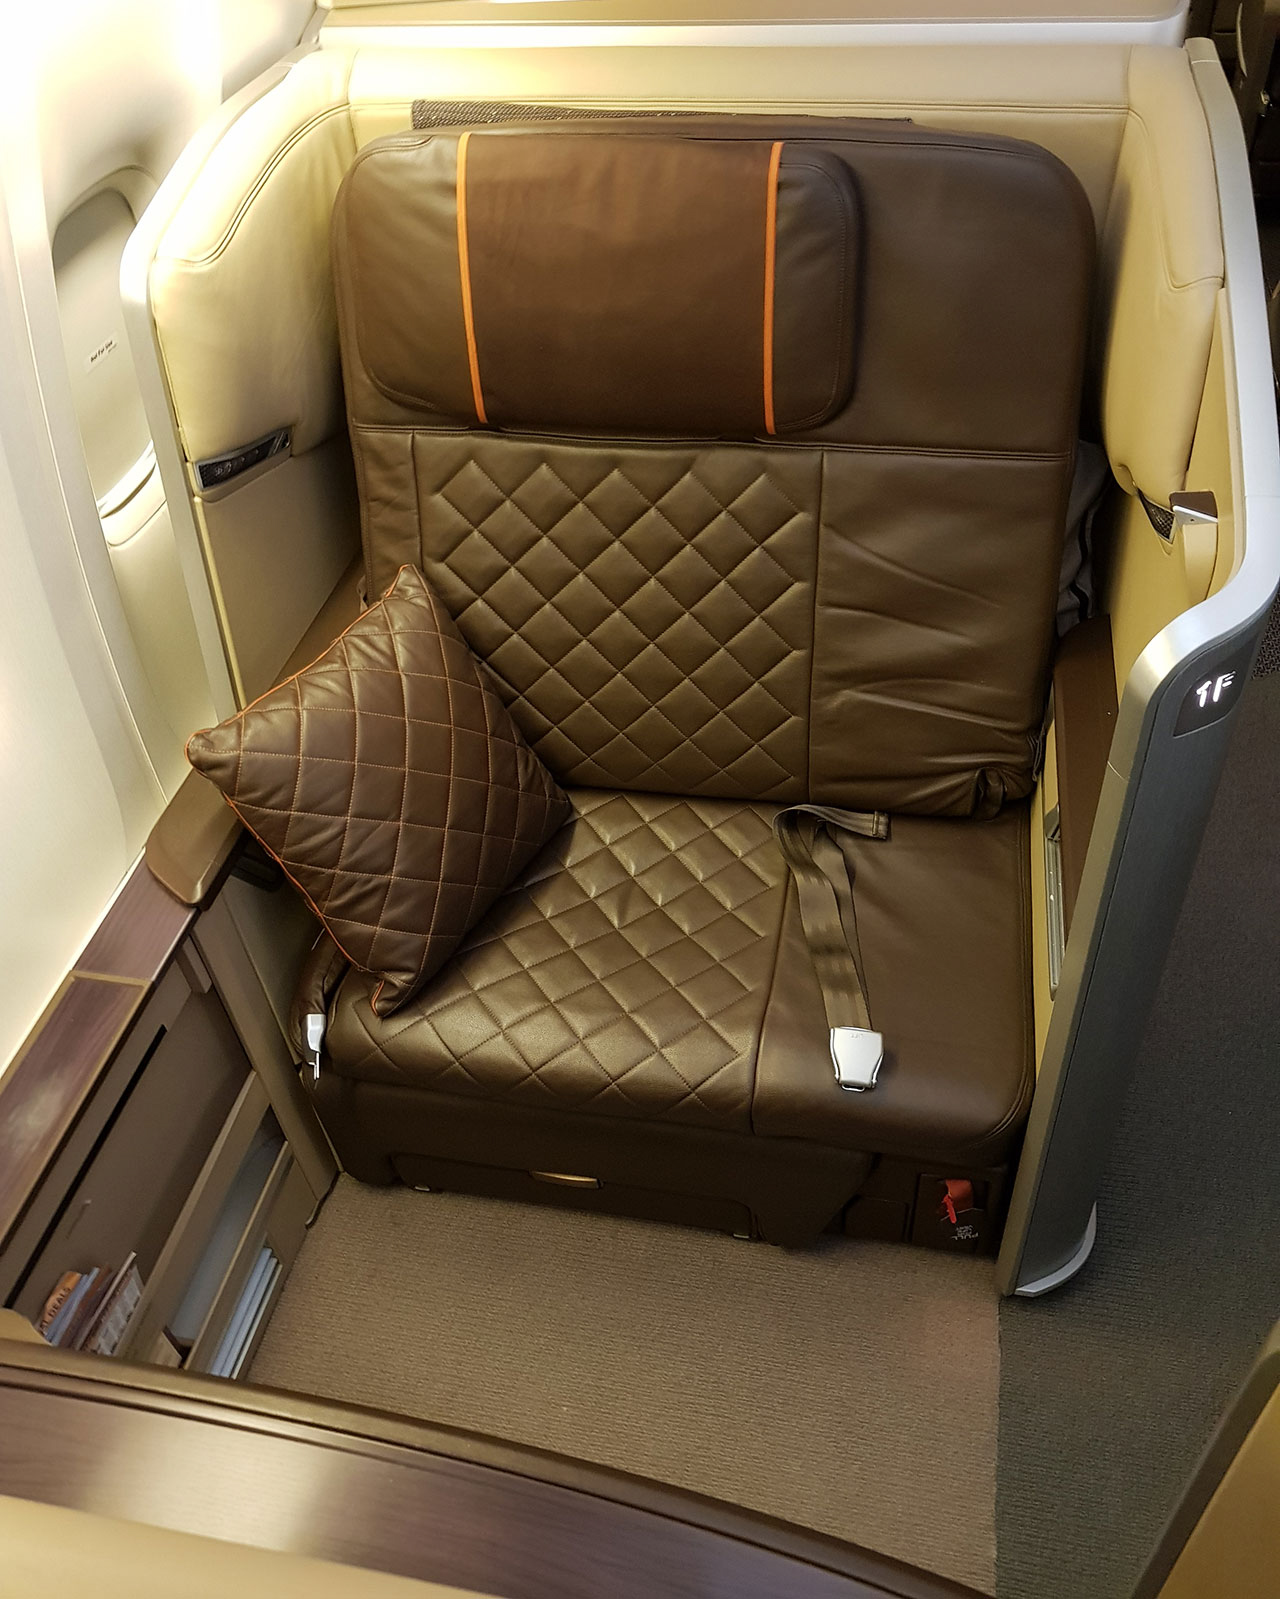 Singapore Airlines 777-300ER First Class | Point Hacks